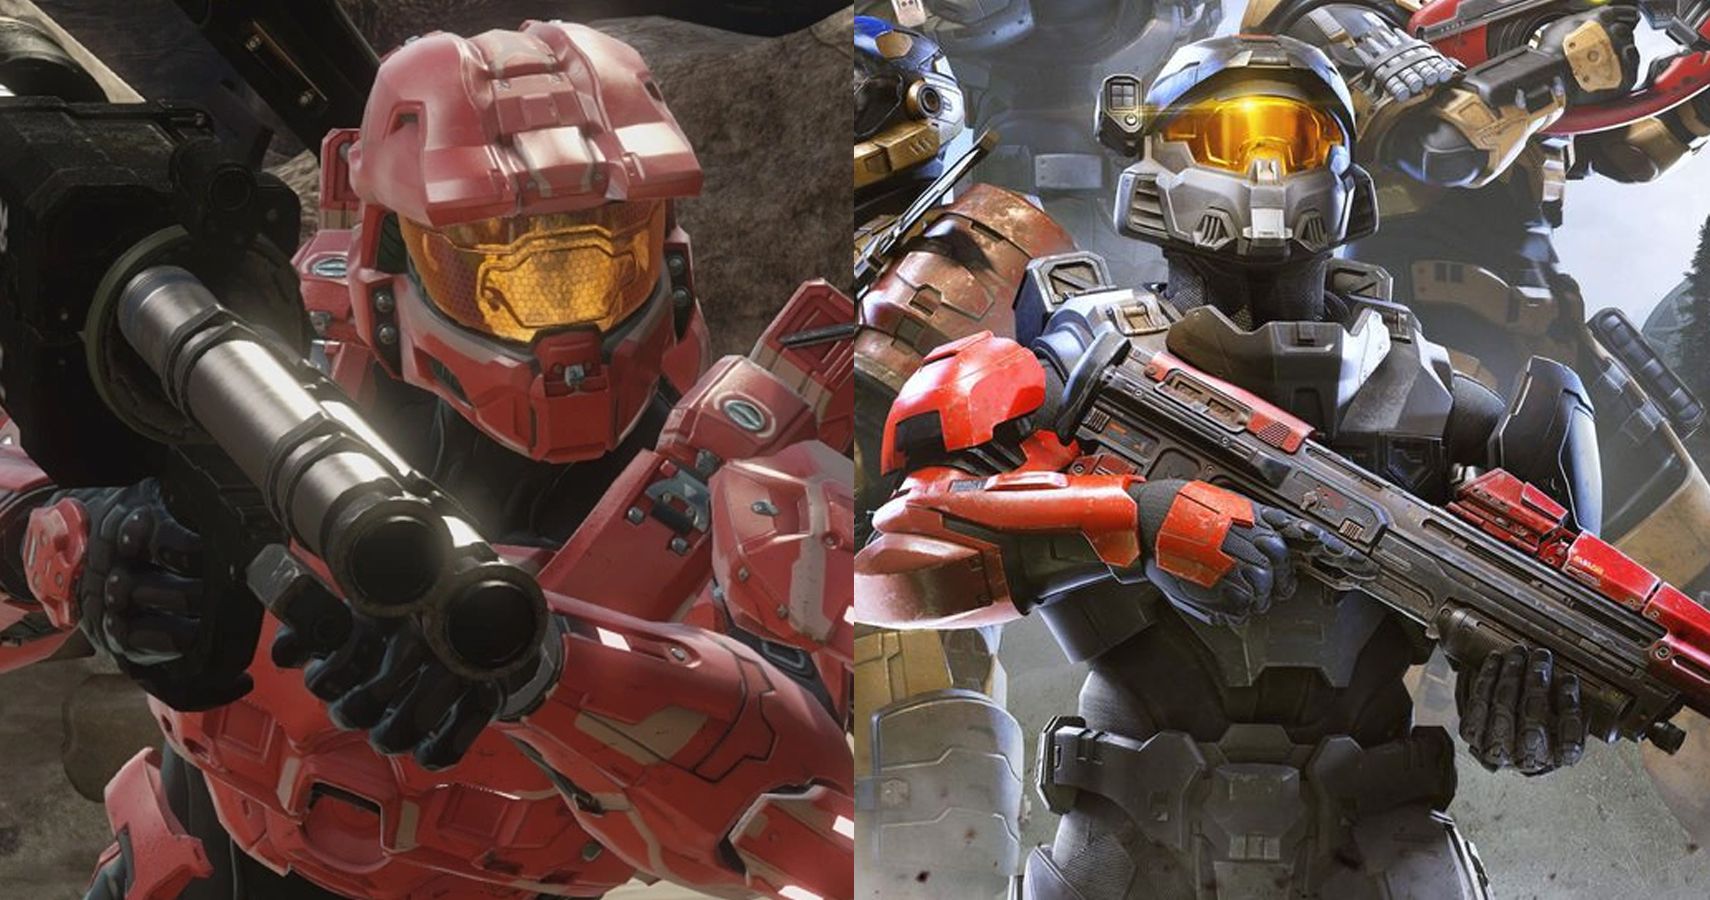 Halo: Every Game Ranked By Which Has The Best Multiplayer